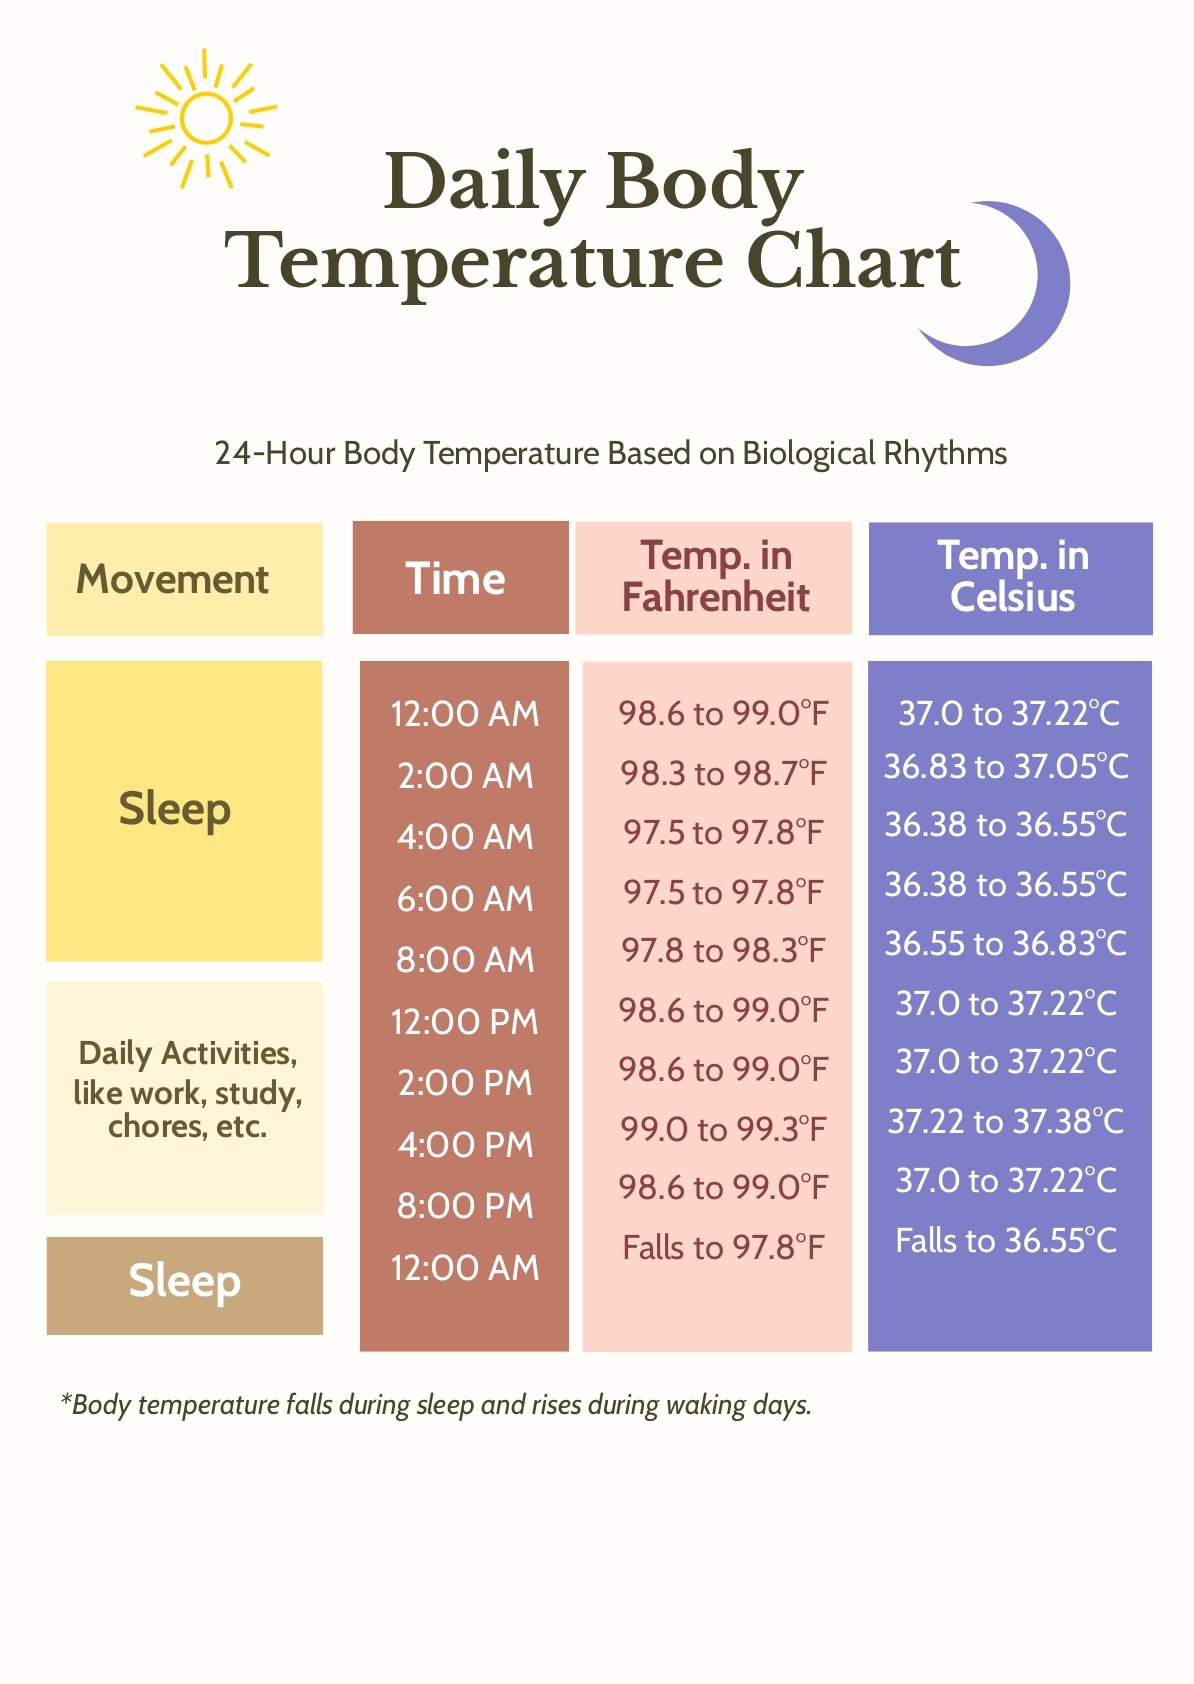 Daily Body Temperature Chart